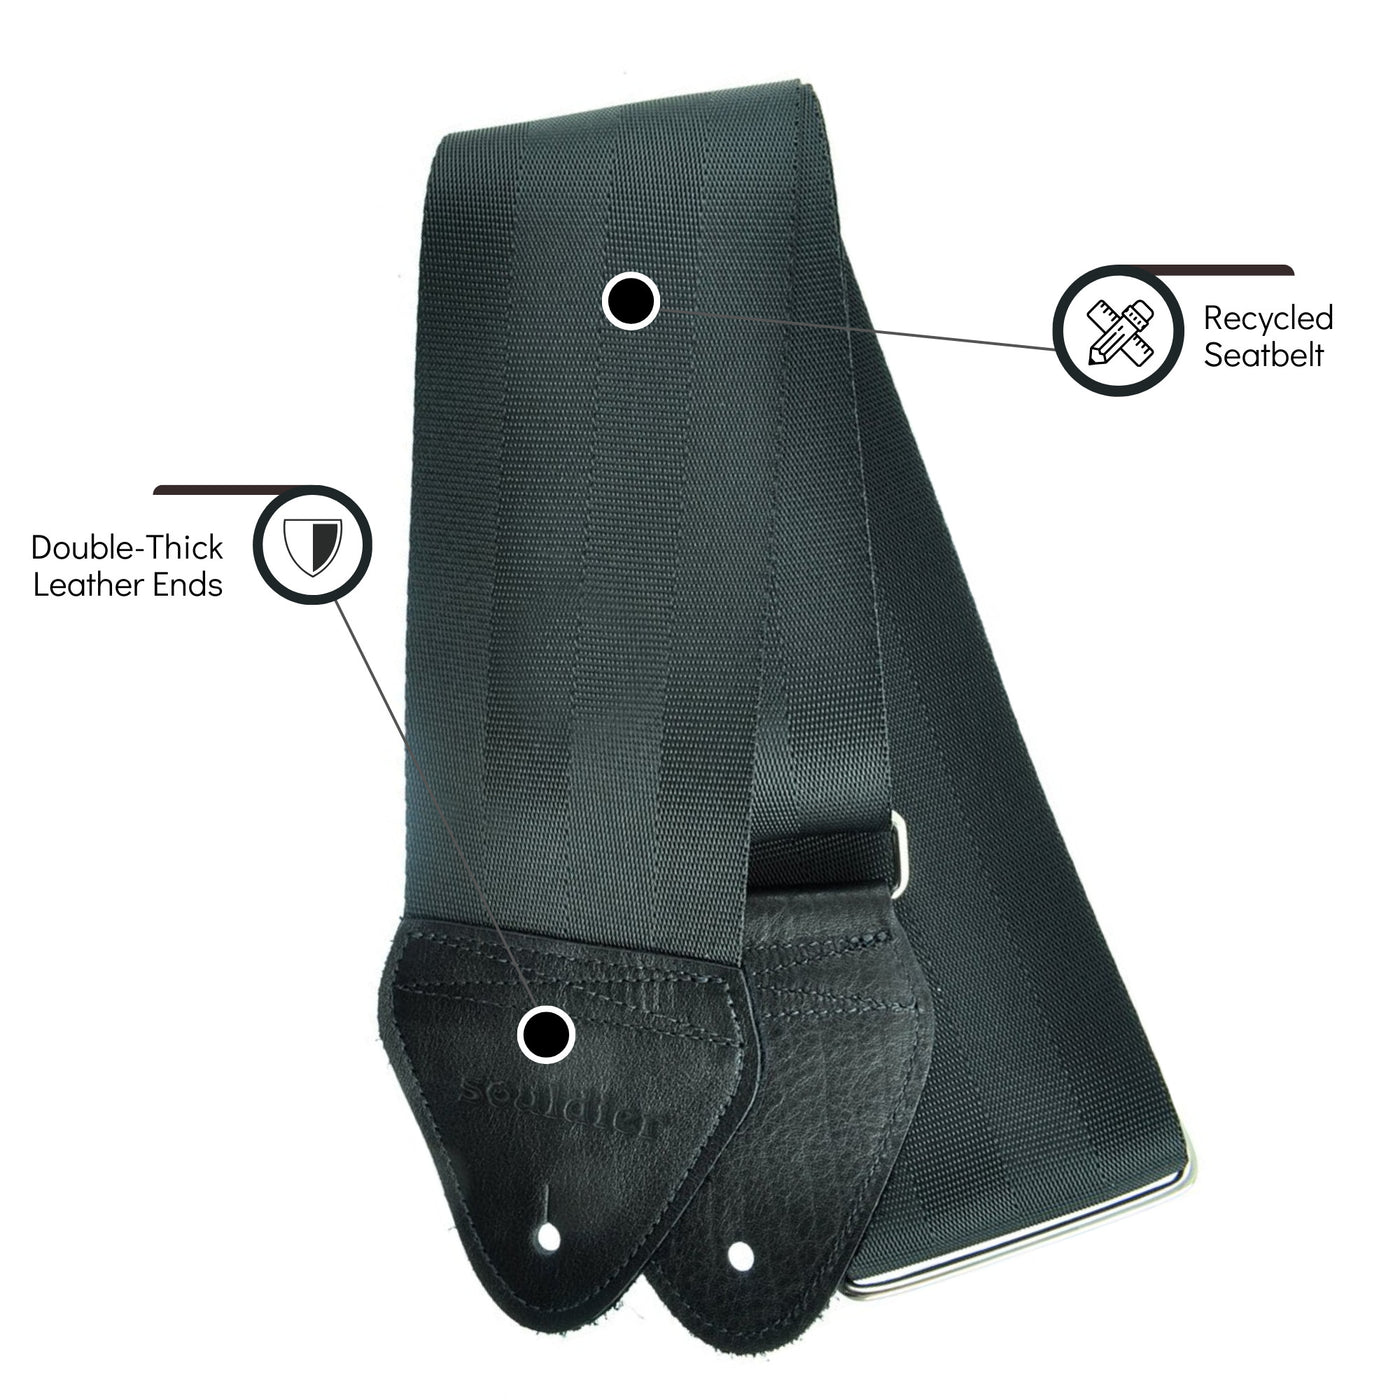 Souldier GT0000BK02BK - Handmade Souldier Solid Bass Strap, 3 Inches Wide and Adjustable from 33" to 60" Made in the USA, Black